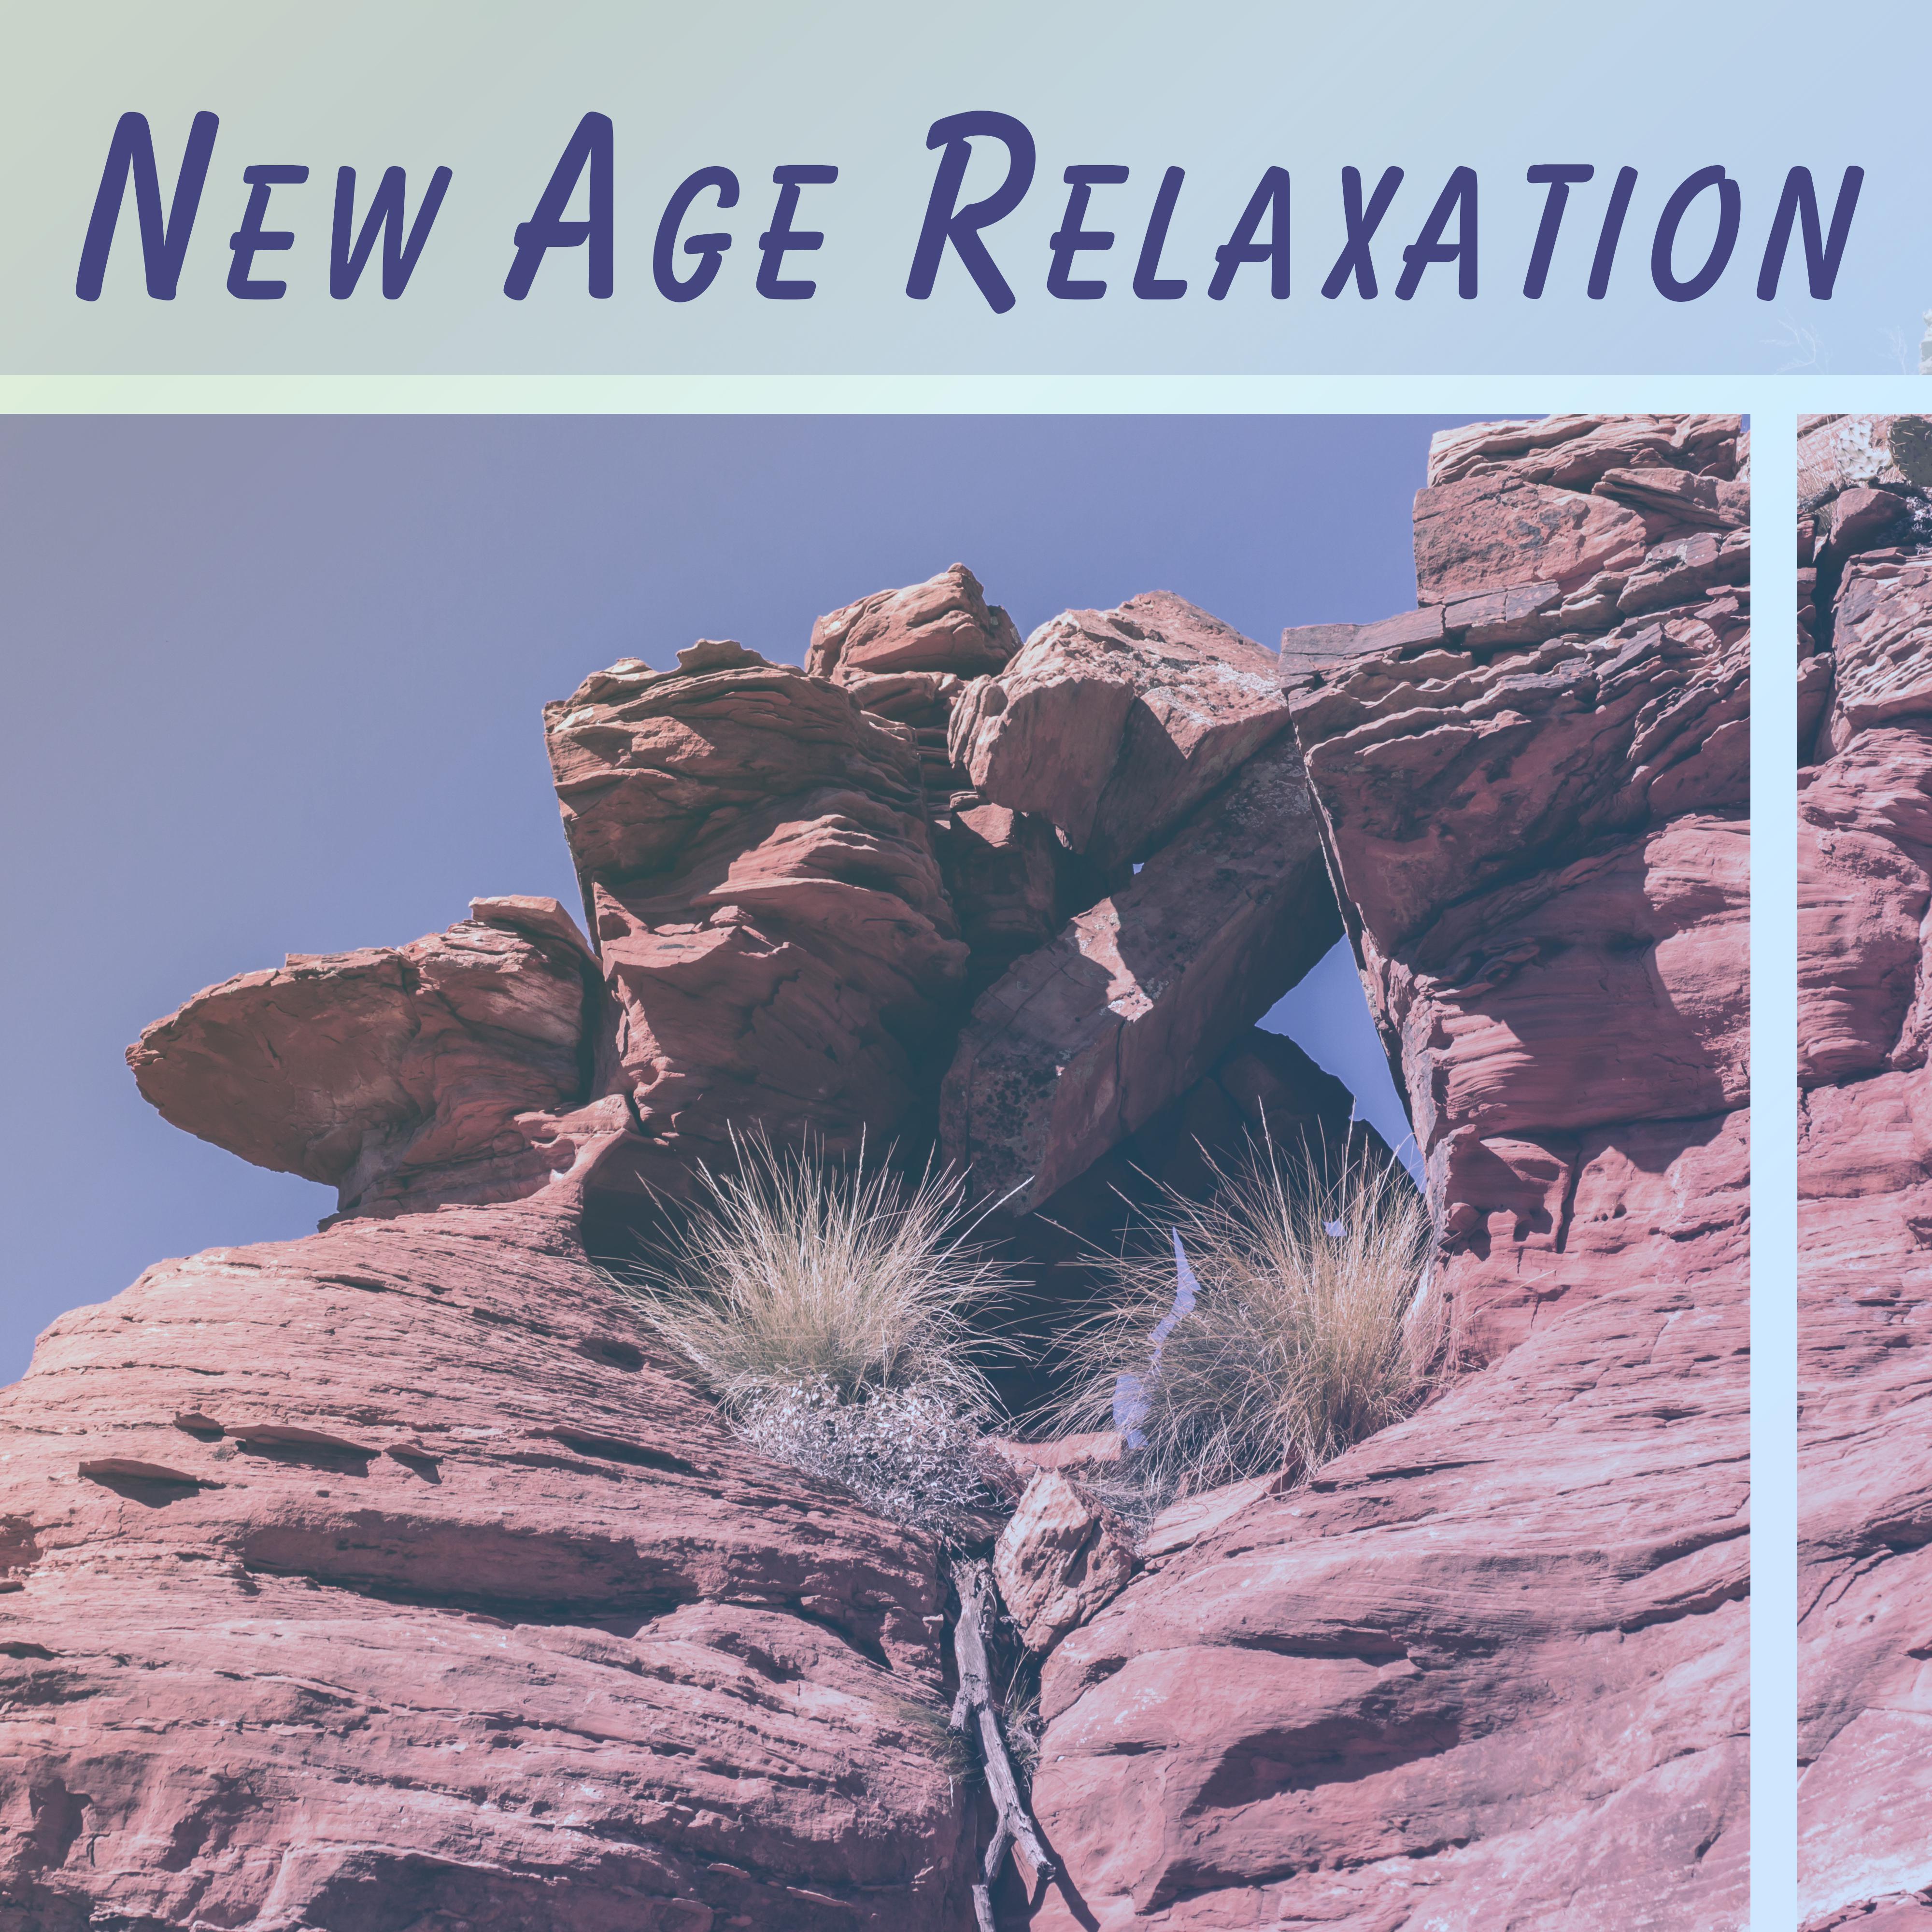 New Age Relaxation – Nature Sounds to Rest, Stress Relief, Forest Music, Sounds of Birds, Peaceful Music for Relax, Deep Sleep